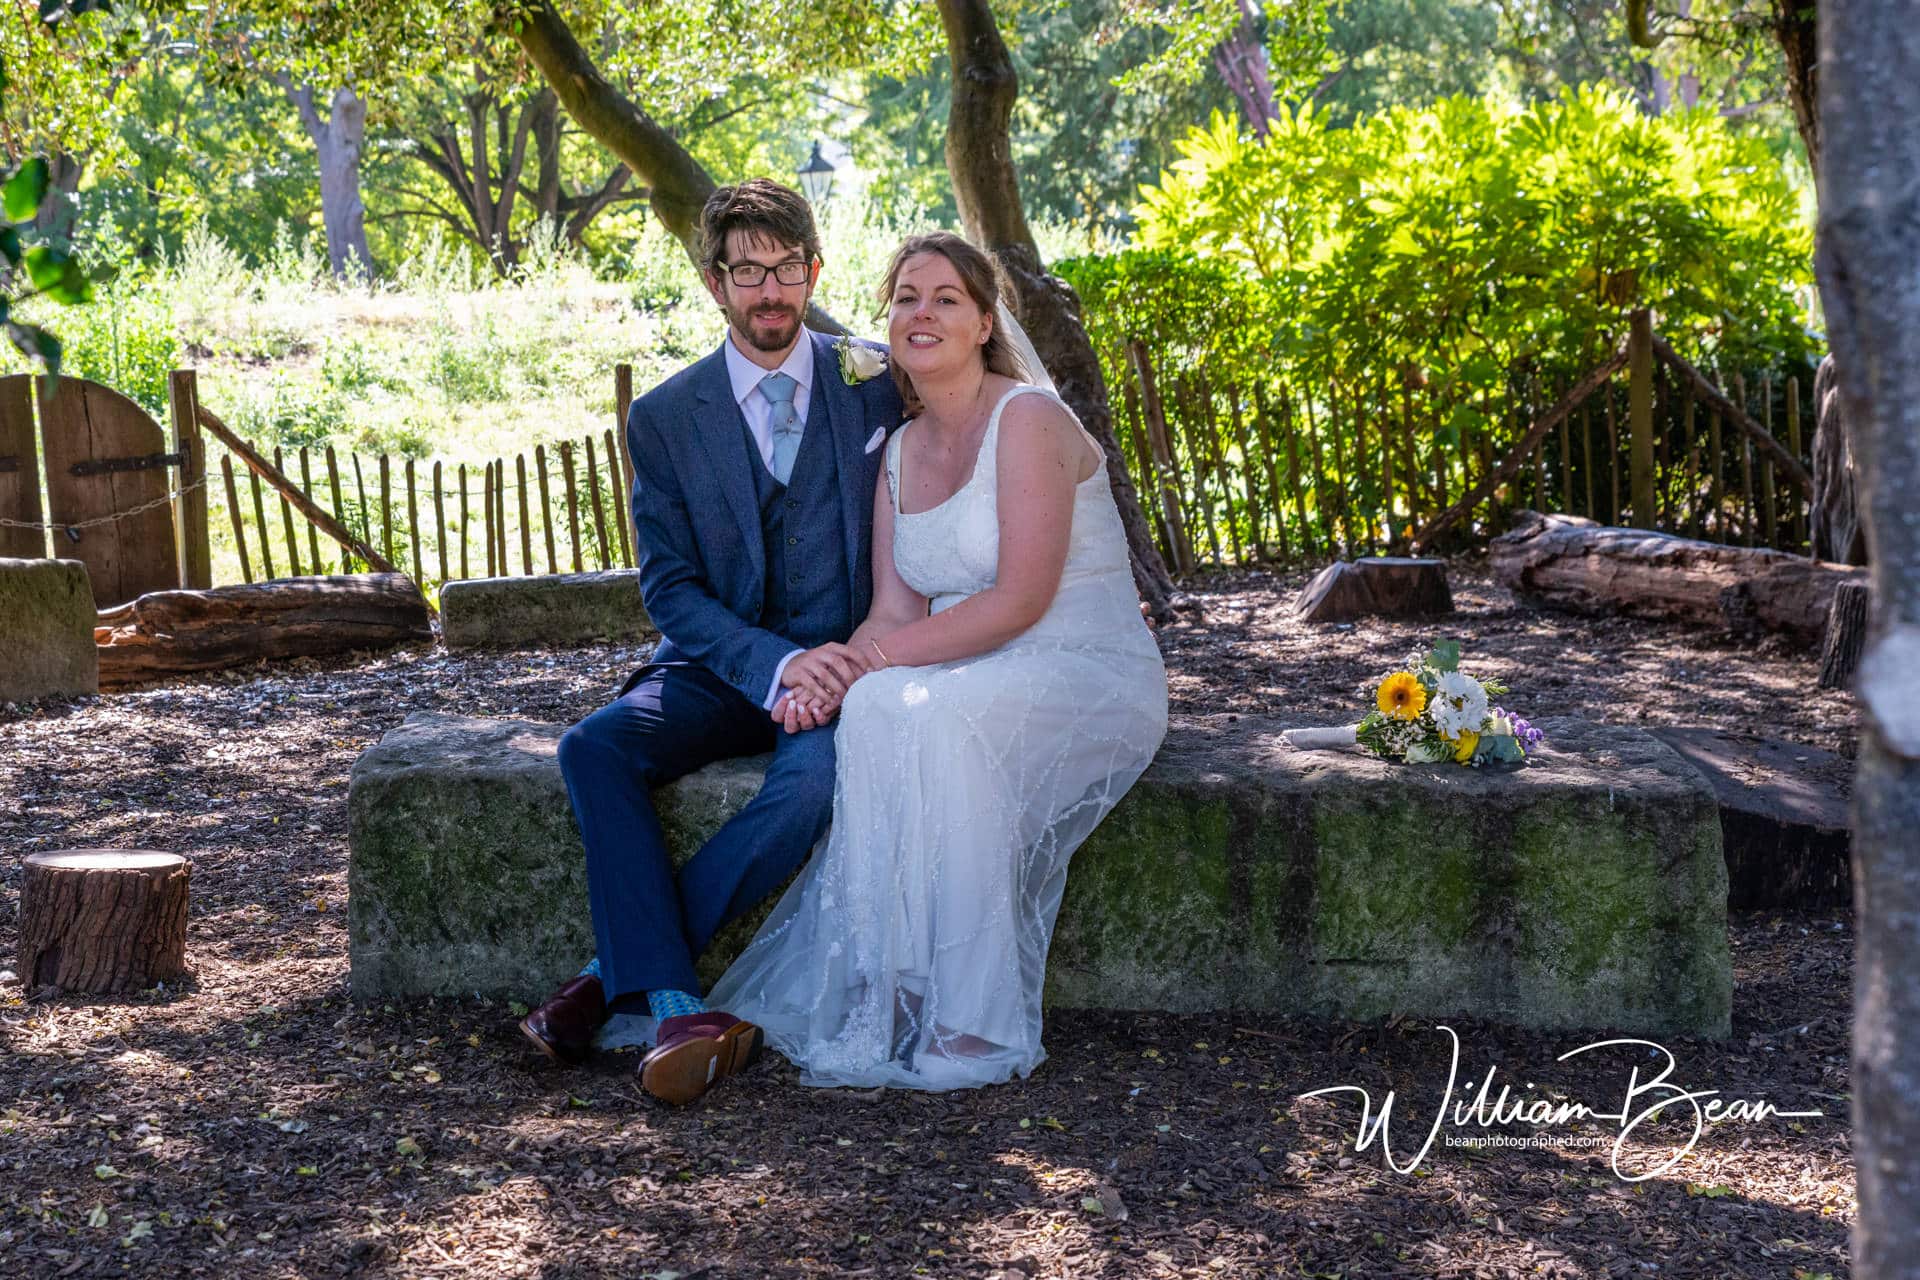 022-wedding-photography-bootham-suite-york-registry-office